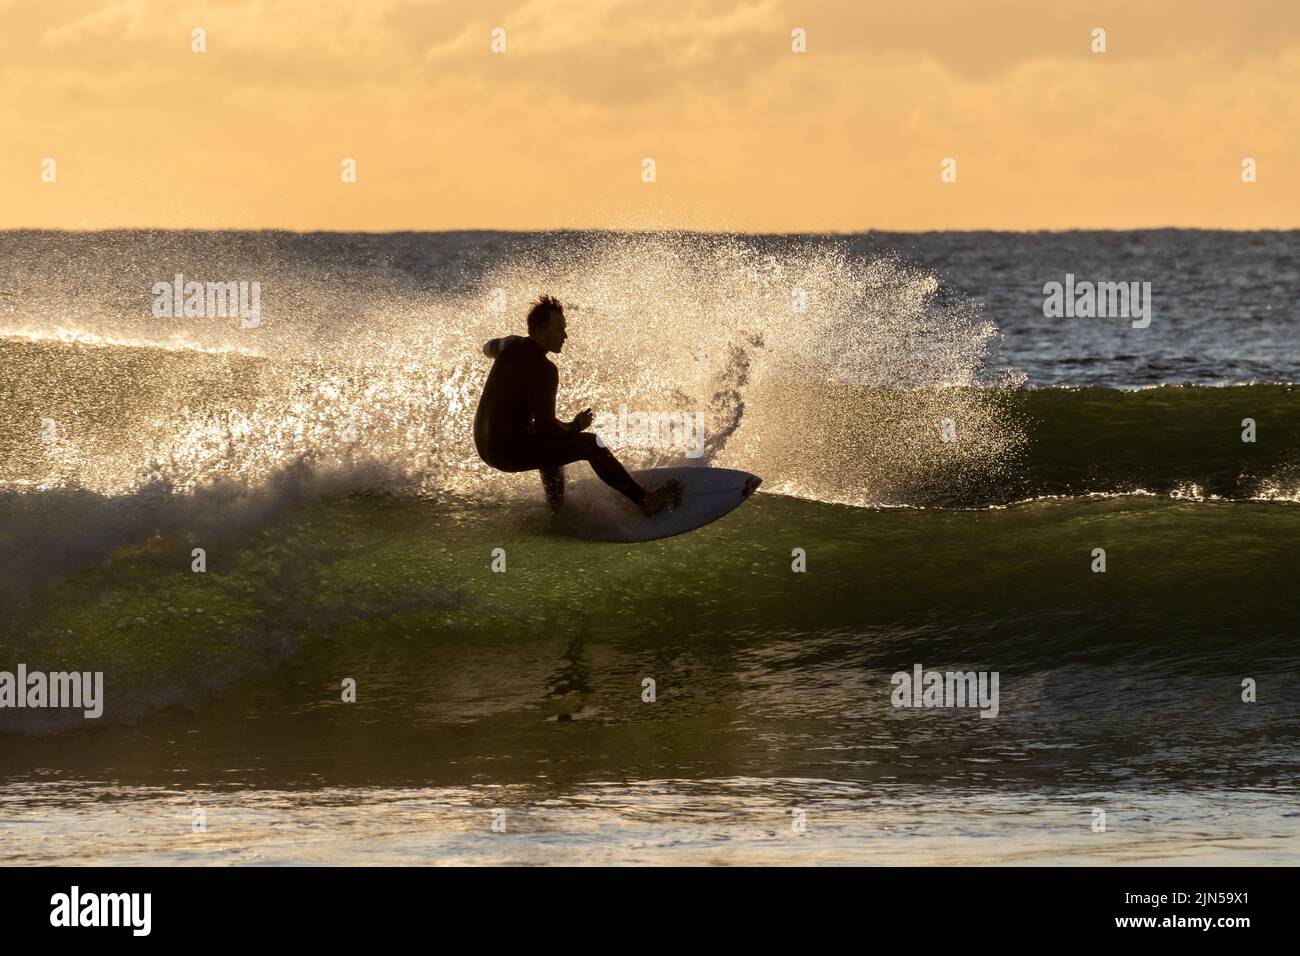 The surfer riding a wave in the early morning. Maroochydore, Australia. Stock Photo